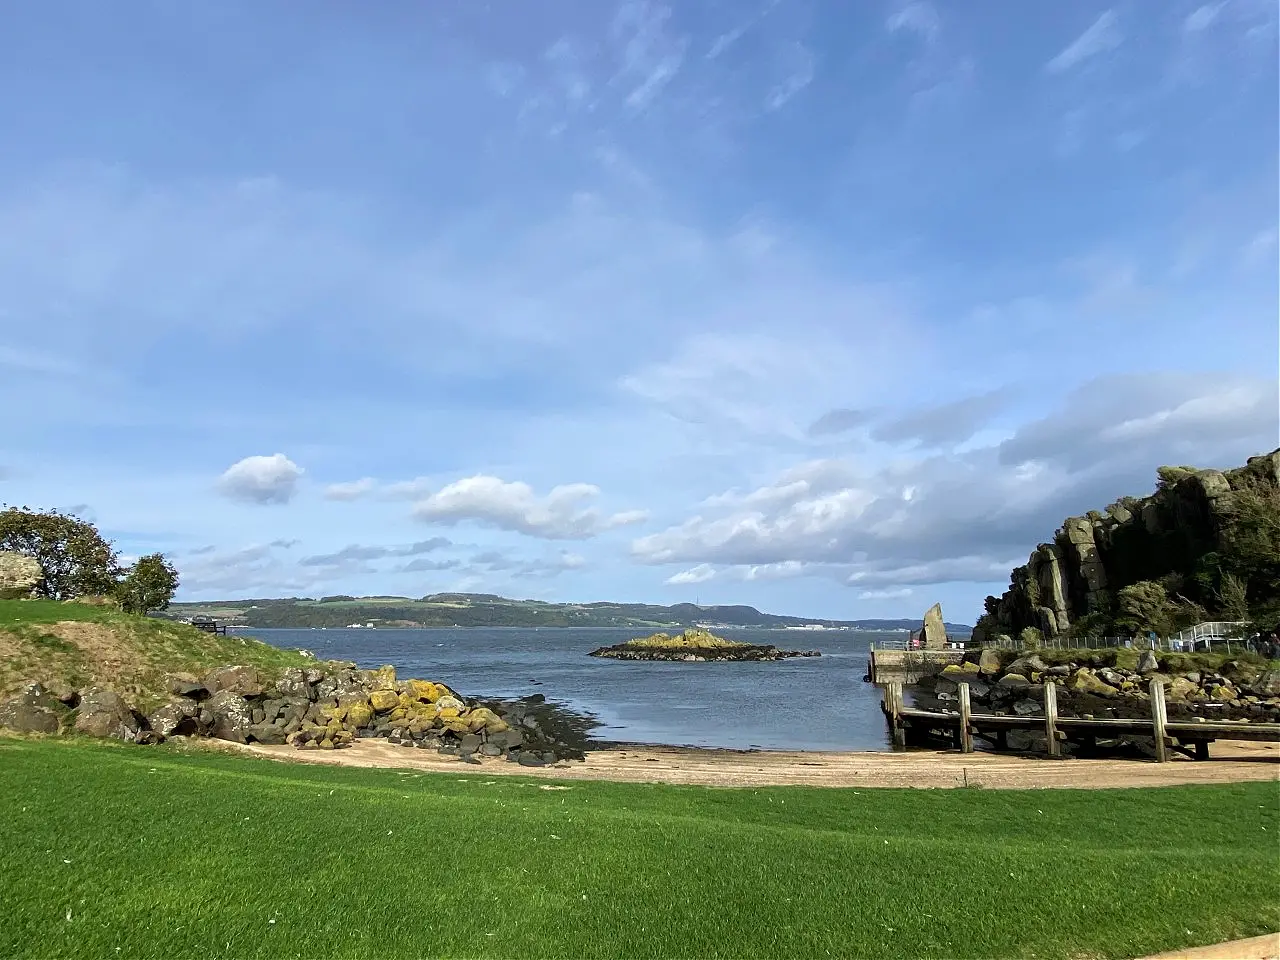 pier at Inchcolm island in the Firth of Forth